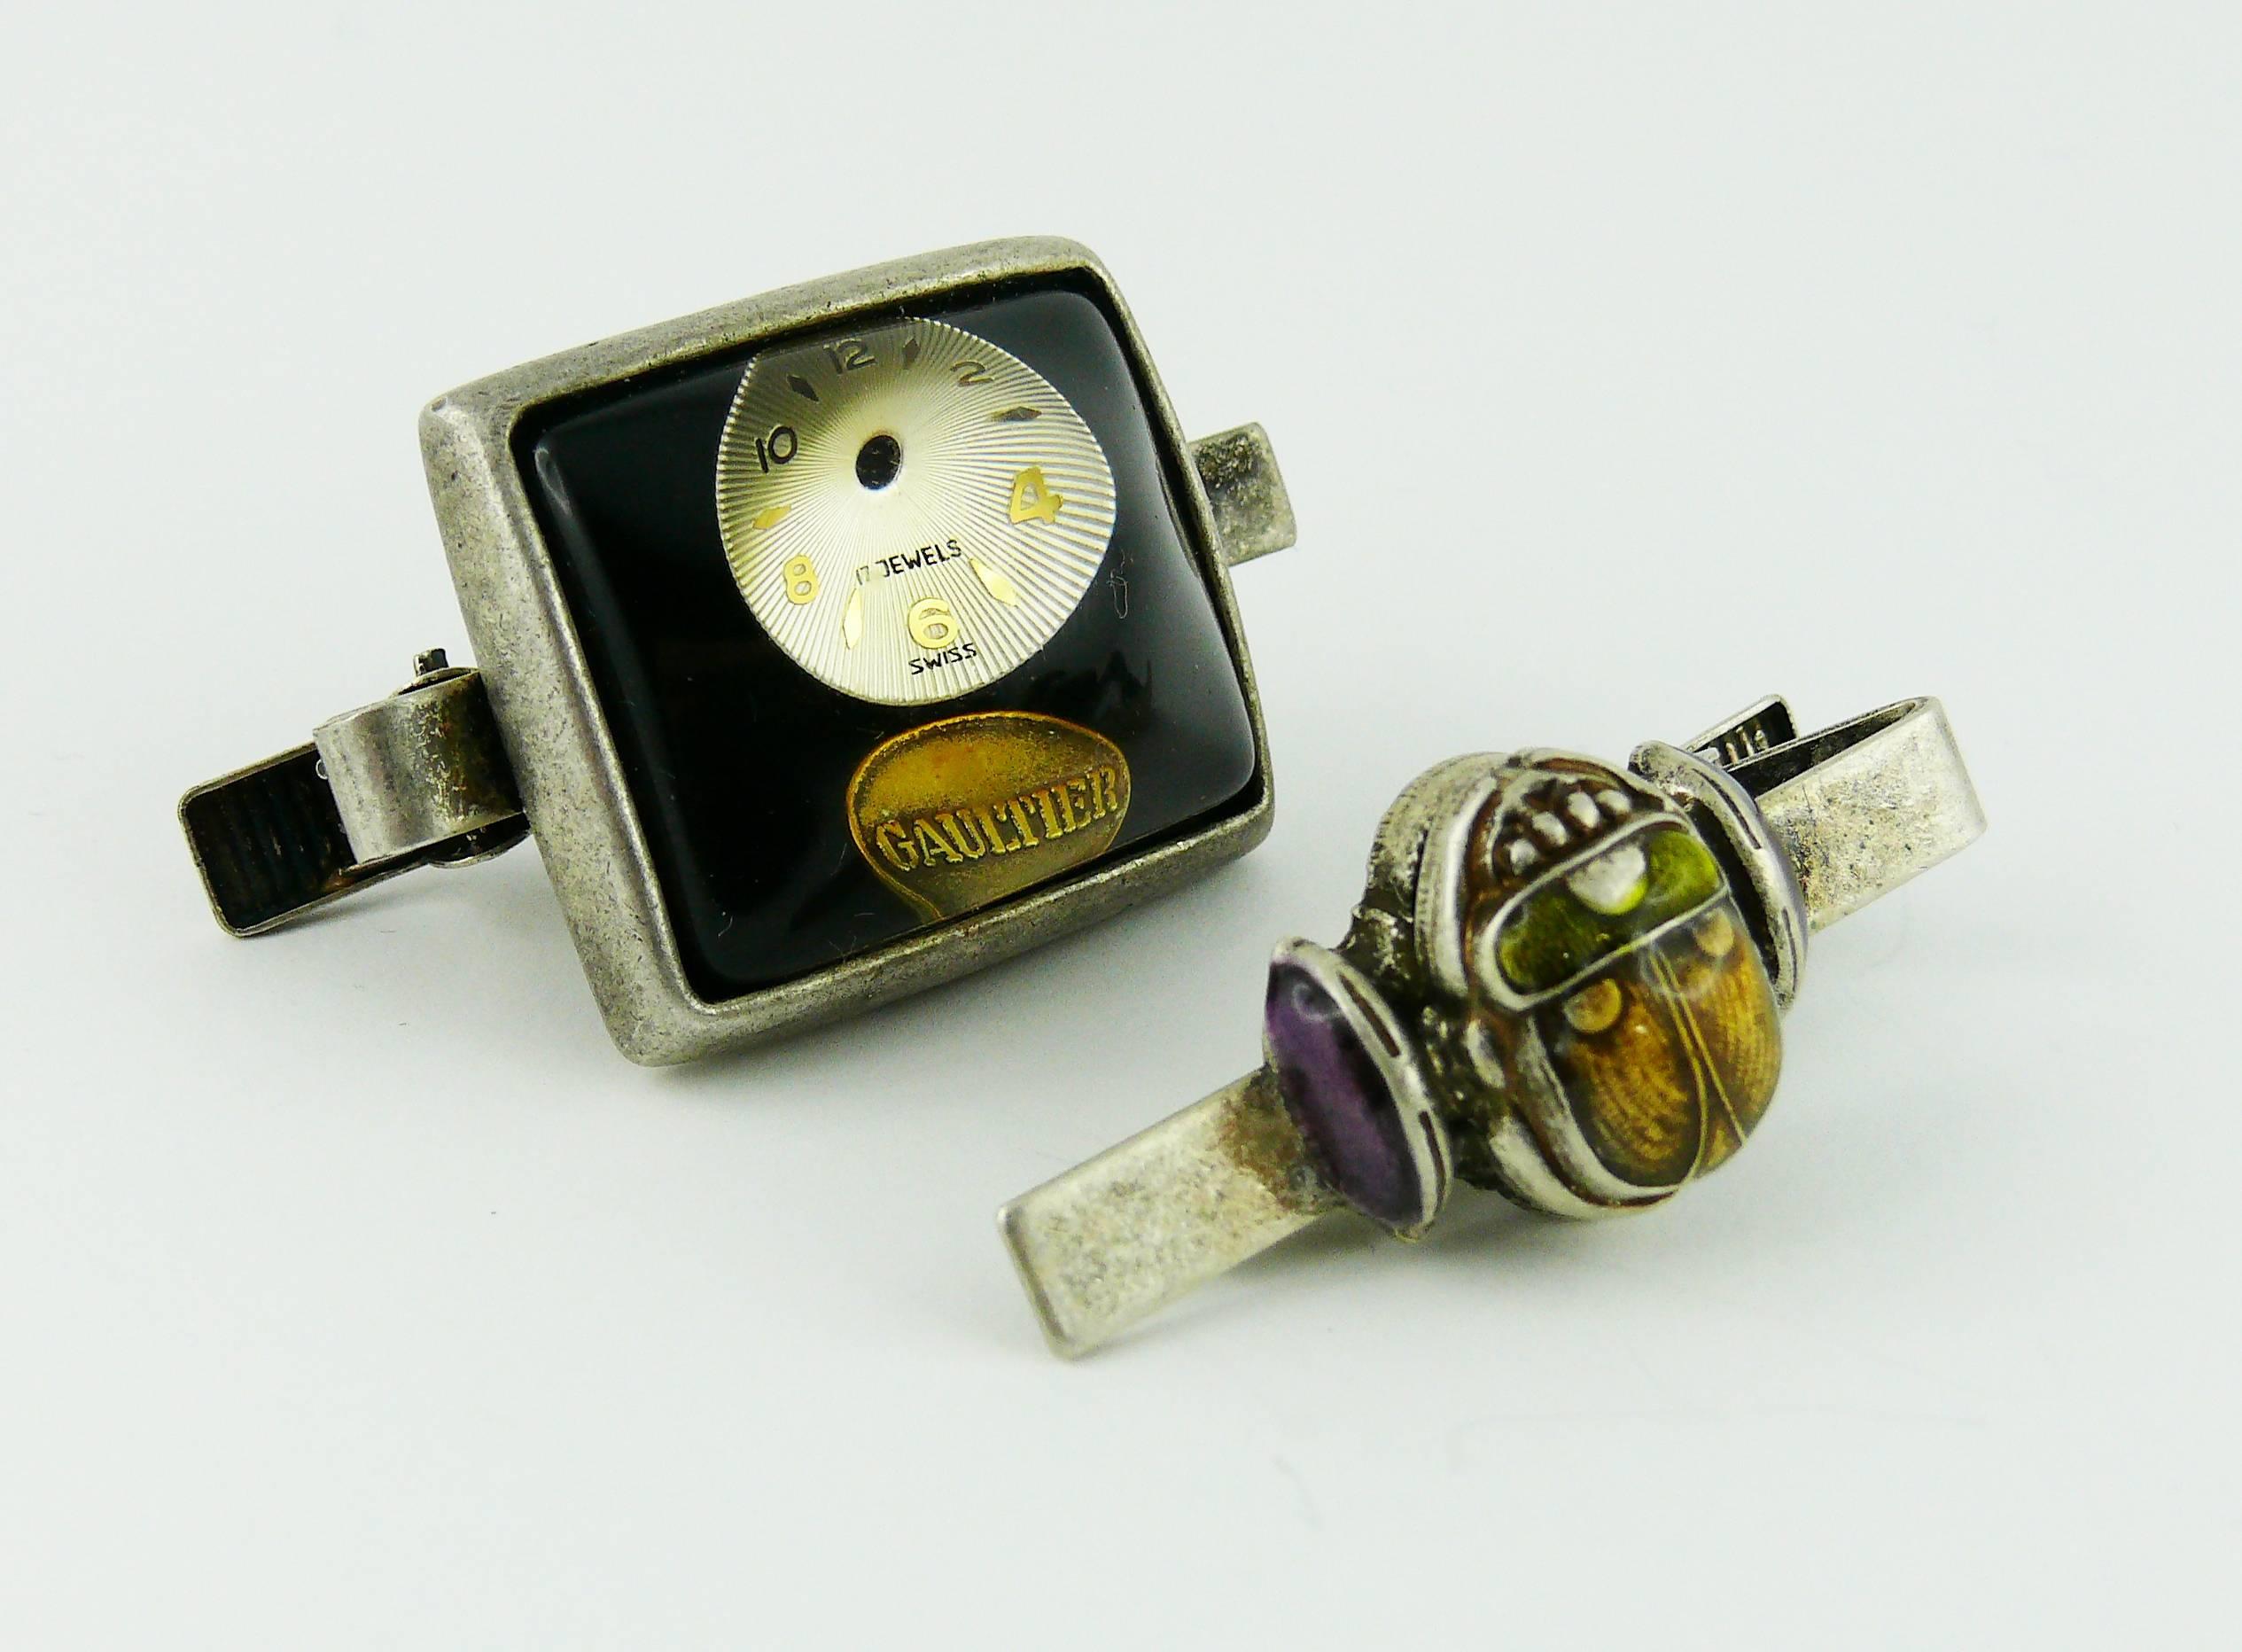 JEAN PAUL GAULTIER vintage 1990s lot of 2 rare tie clips.

One clip features a watch dial inlaid in a domed resin cabochon.
The other features an enameled scarab.

Silver tone setting with antique patina.

Marked GAULTIER on the watch dial clip.
The